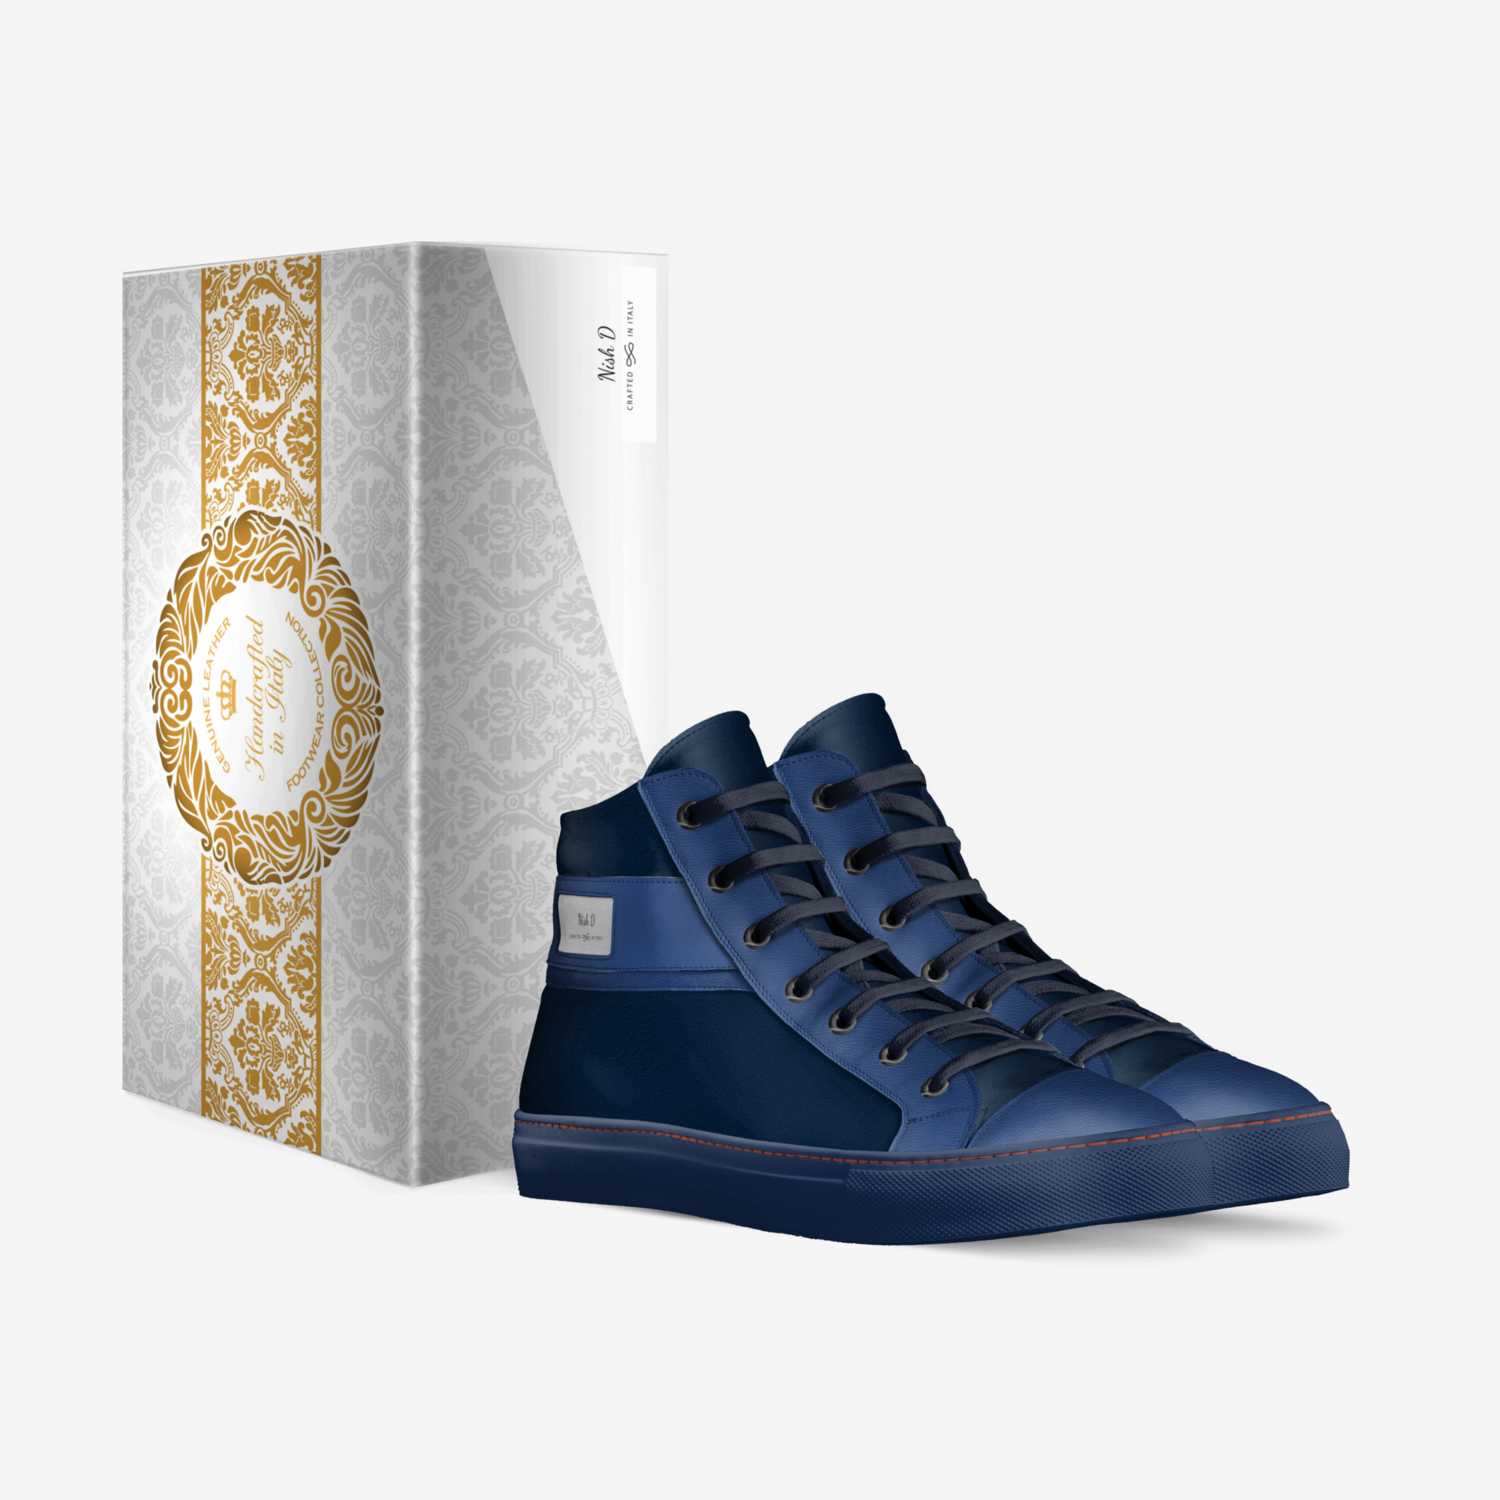 Nish D custom made in Italy shoes by Anish Devkaran | Box view